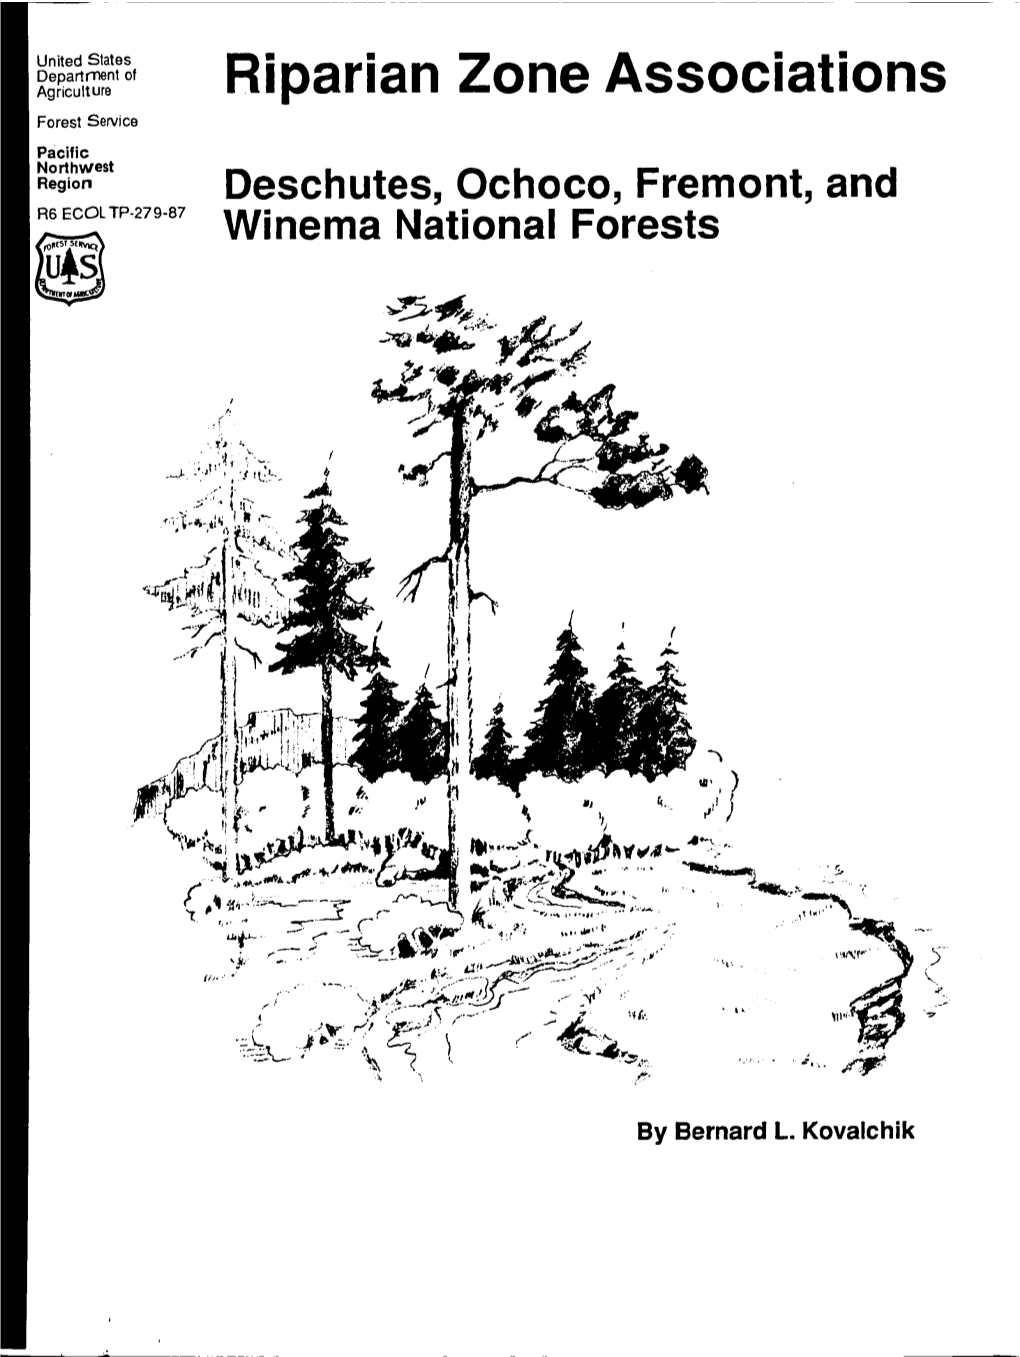 Riparian Zone Associations Forest Service Pacific Northwest Region Deschutes, Ochoco, Fremont, and R6 ECOLTP-279-87 Winema National Forests